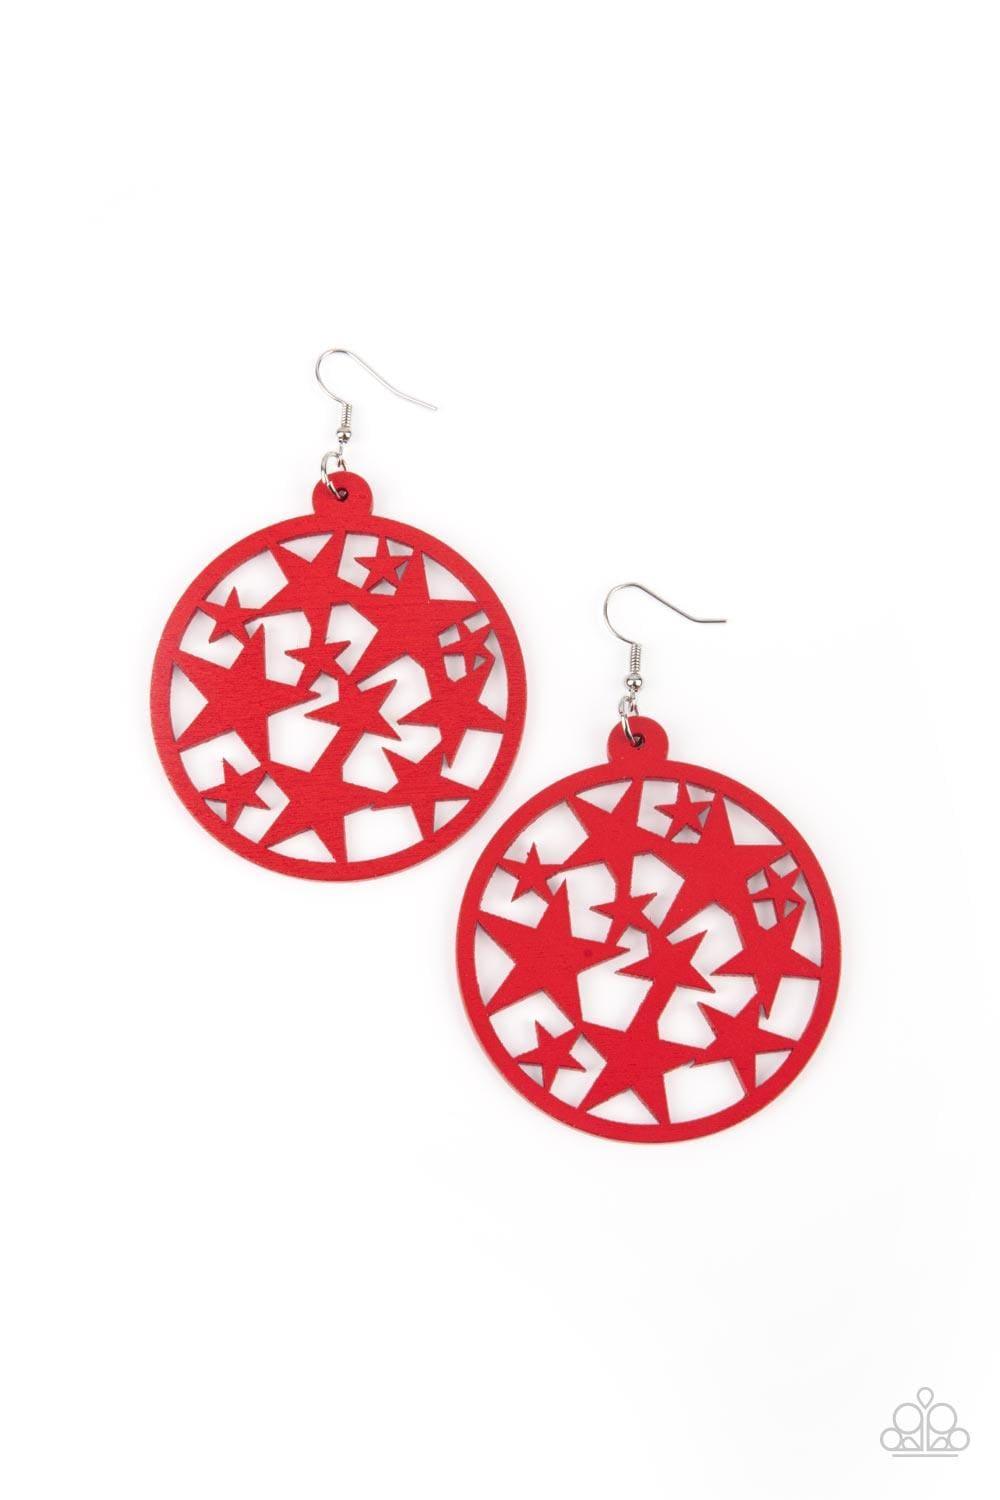 Paparazzi Accessories - Cosmic Paradise - Red Earrings - Bling by JessieK